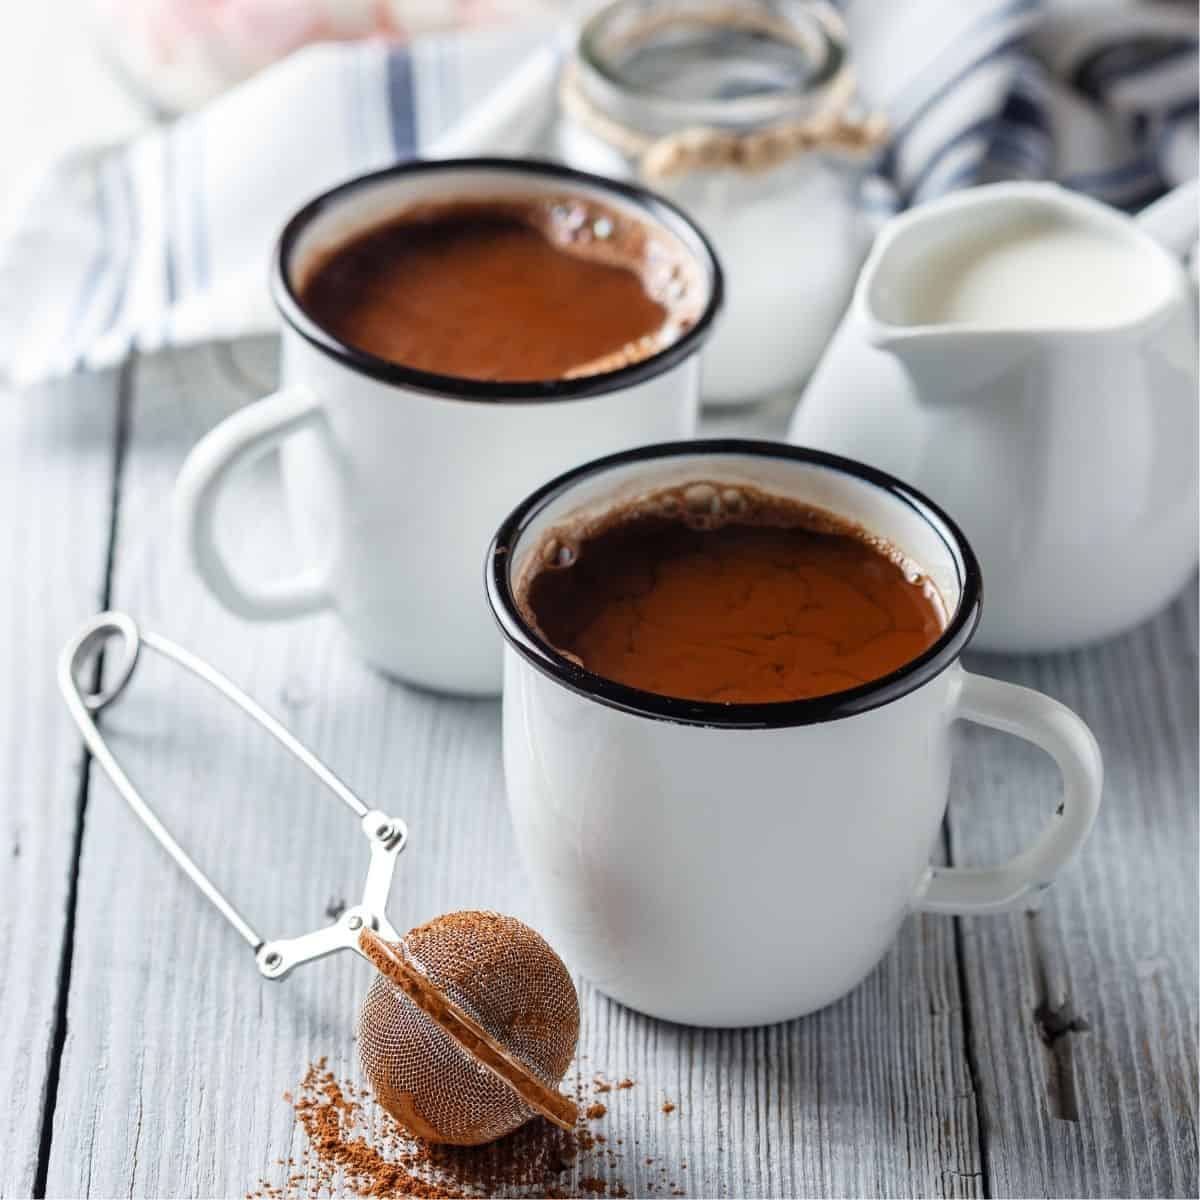 29 Delicious Hot Chocolate Recipes to Try This Winter